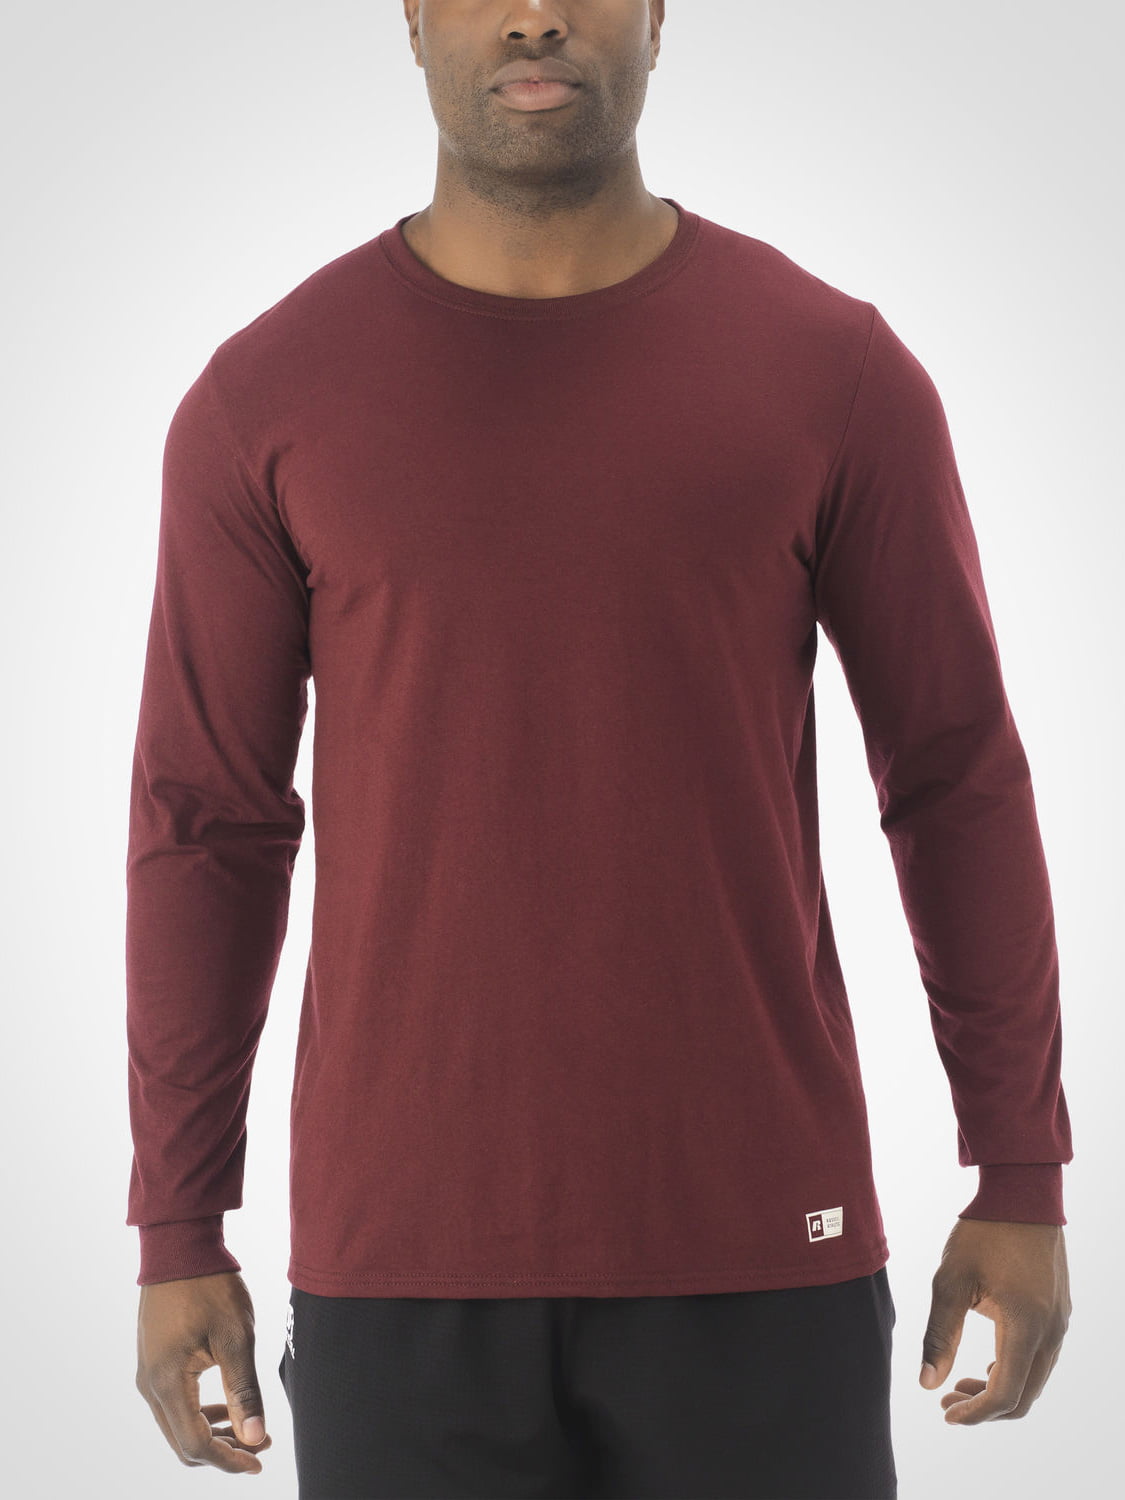 russell athletic long sleeve